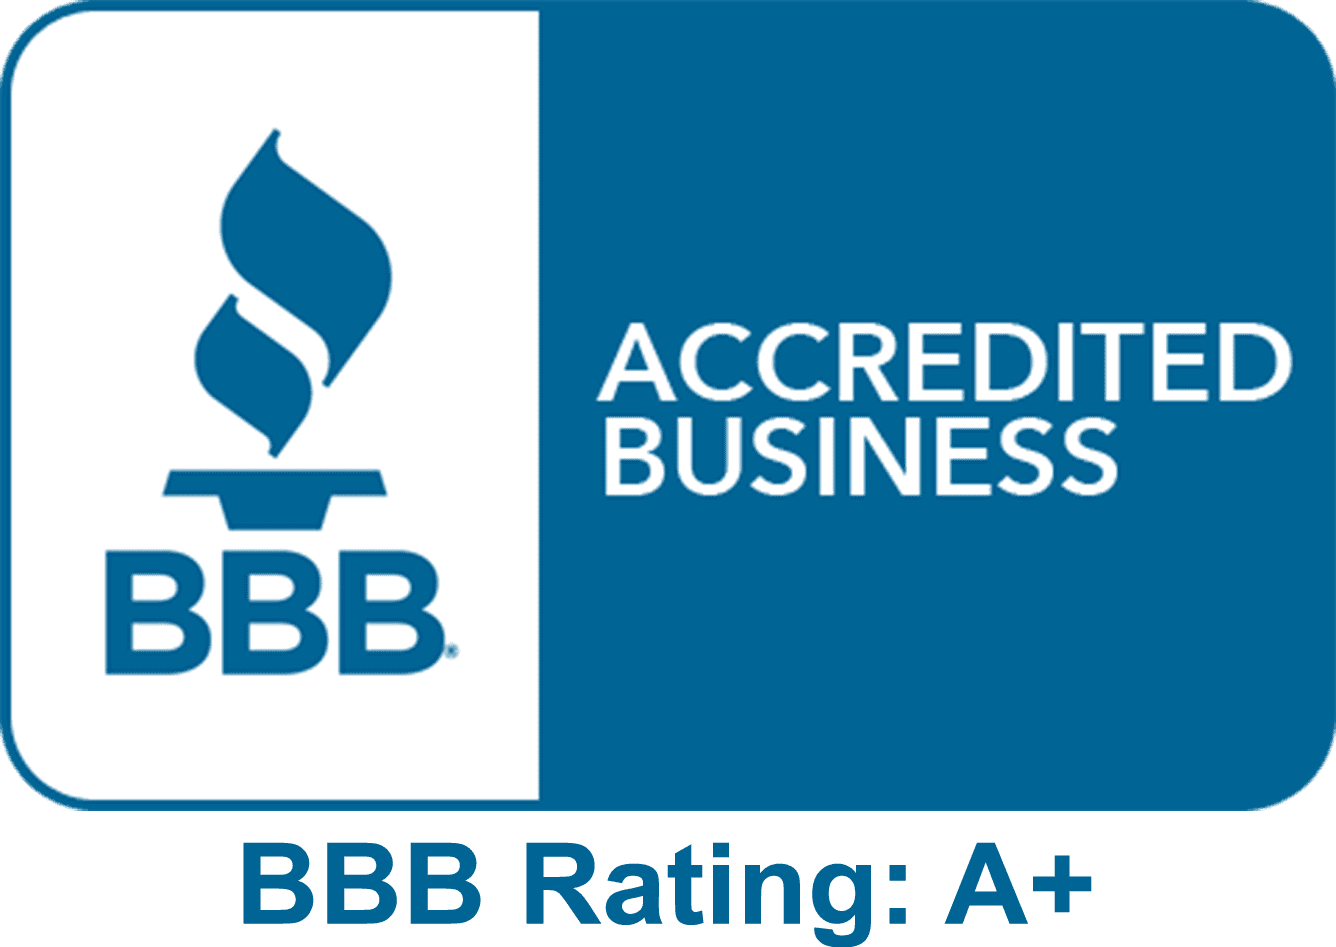 A bbb rating is shown with the words " bbb " in front of it.